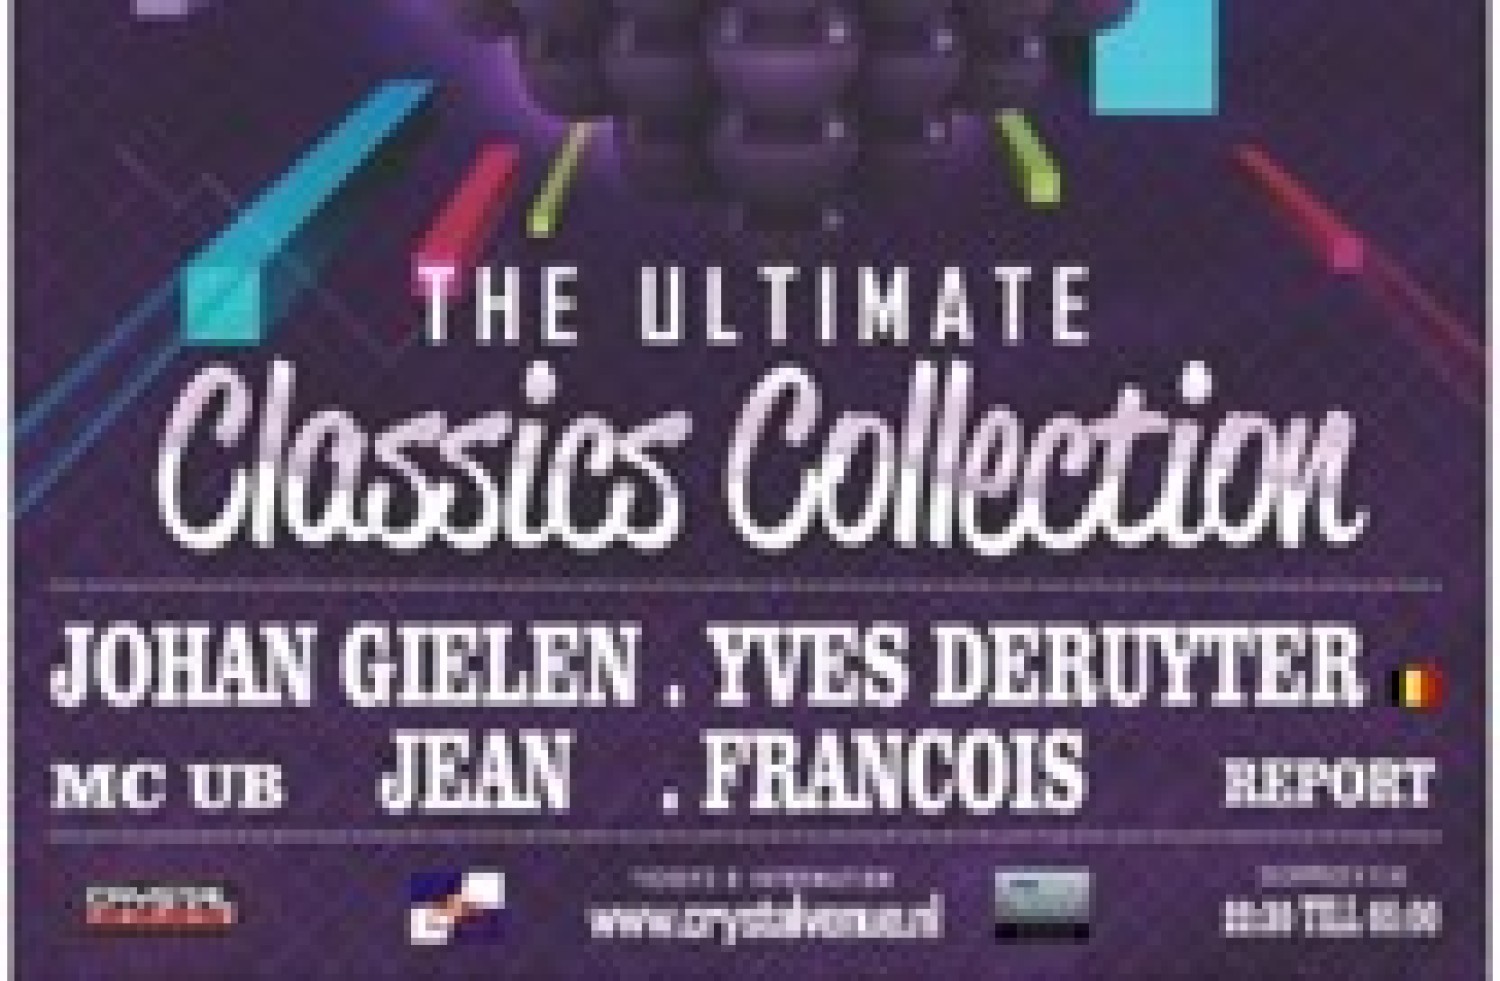 Party nieuws: Zaterdag is ie weer: The Ultimate Classics Collection!